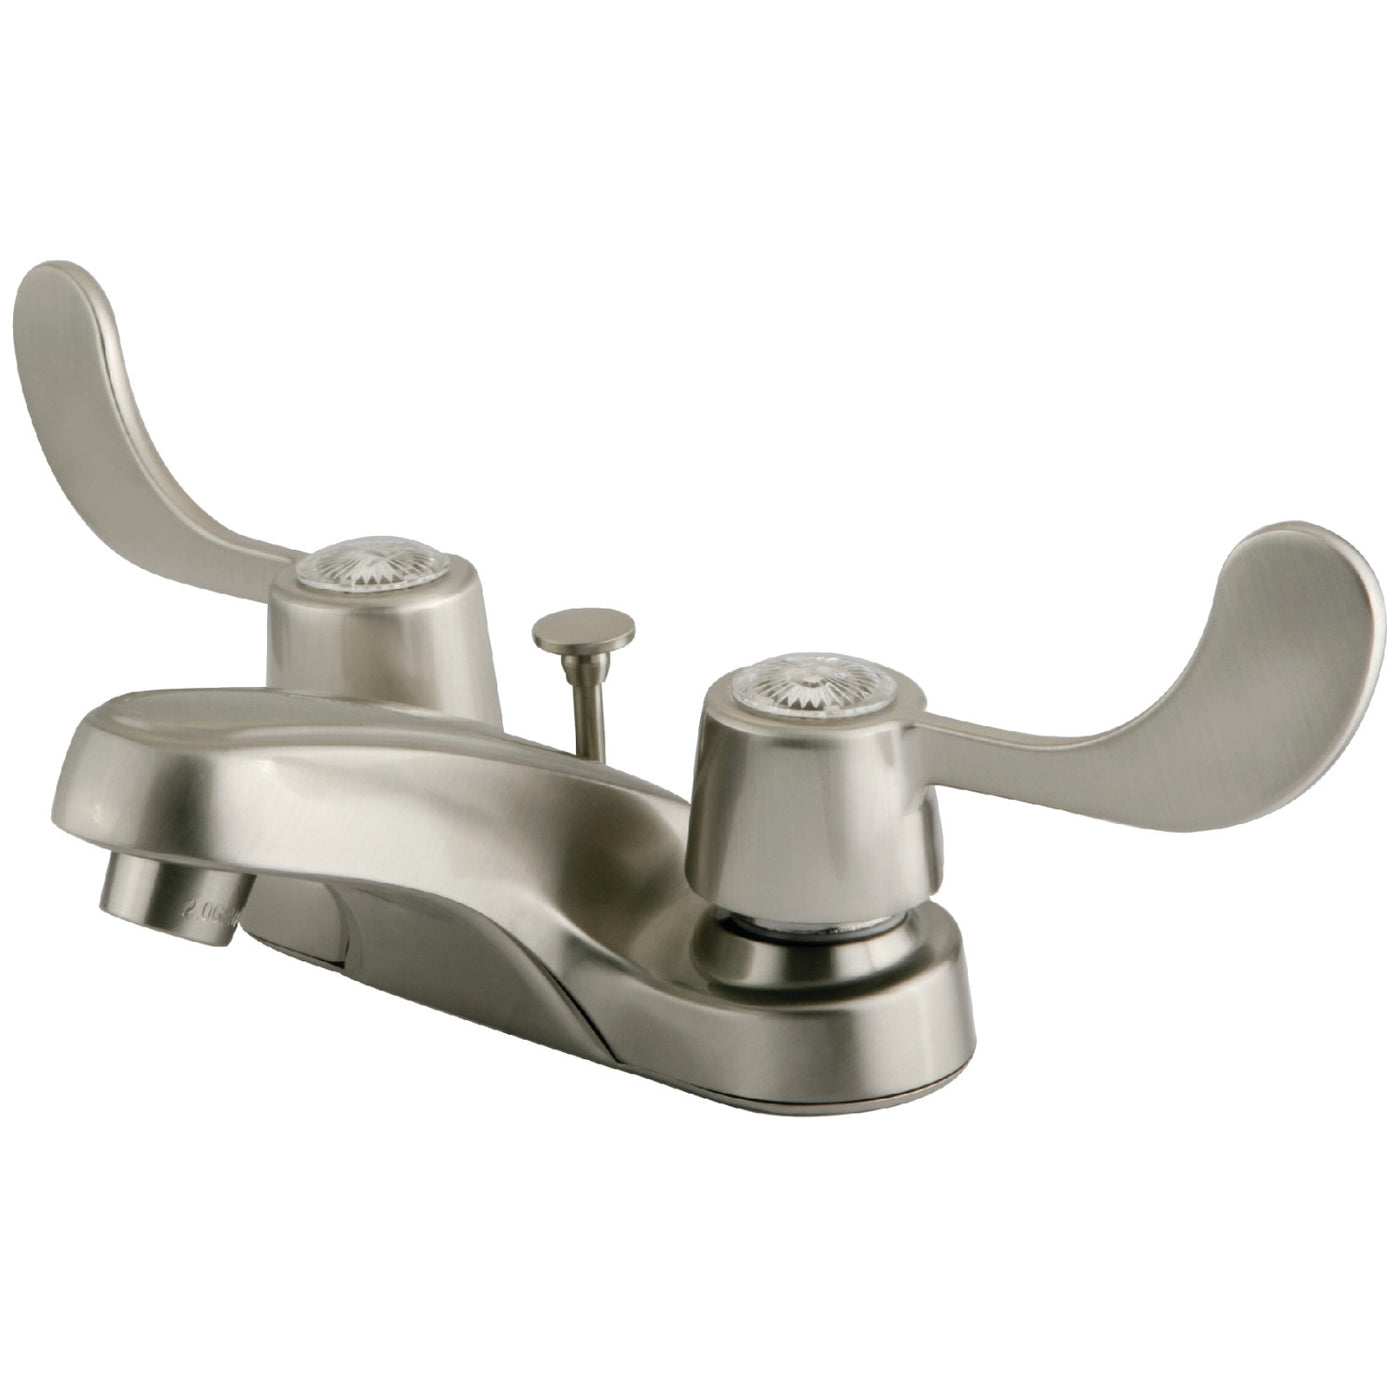 Elements of Design EB188B 4-Inch Centerset Bathroom Faucet, Brushed Nickel